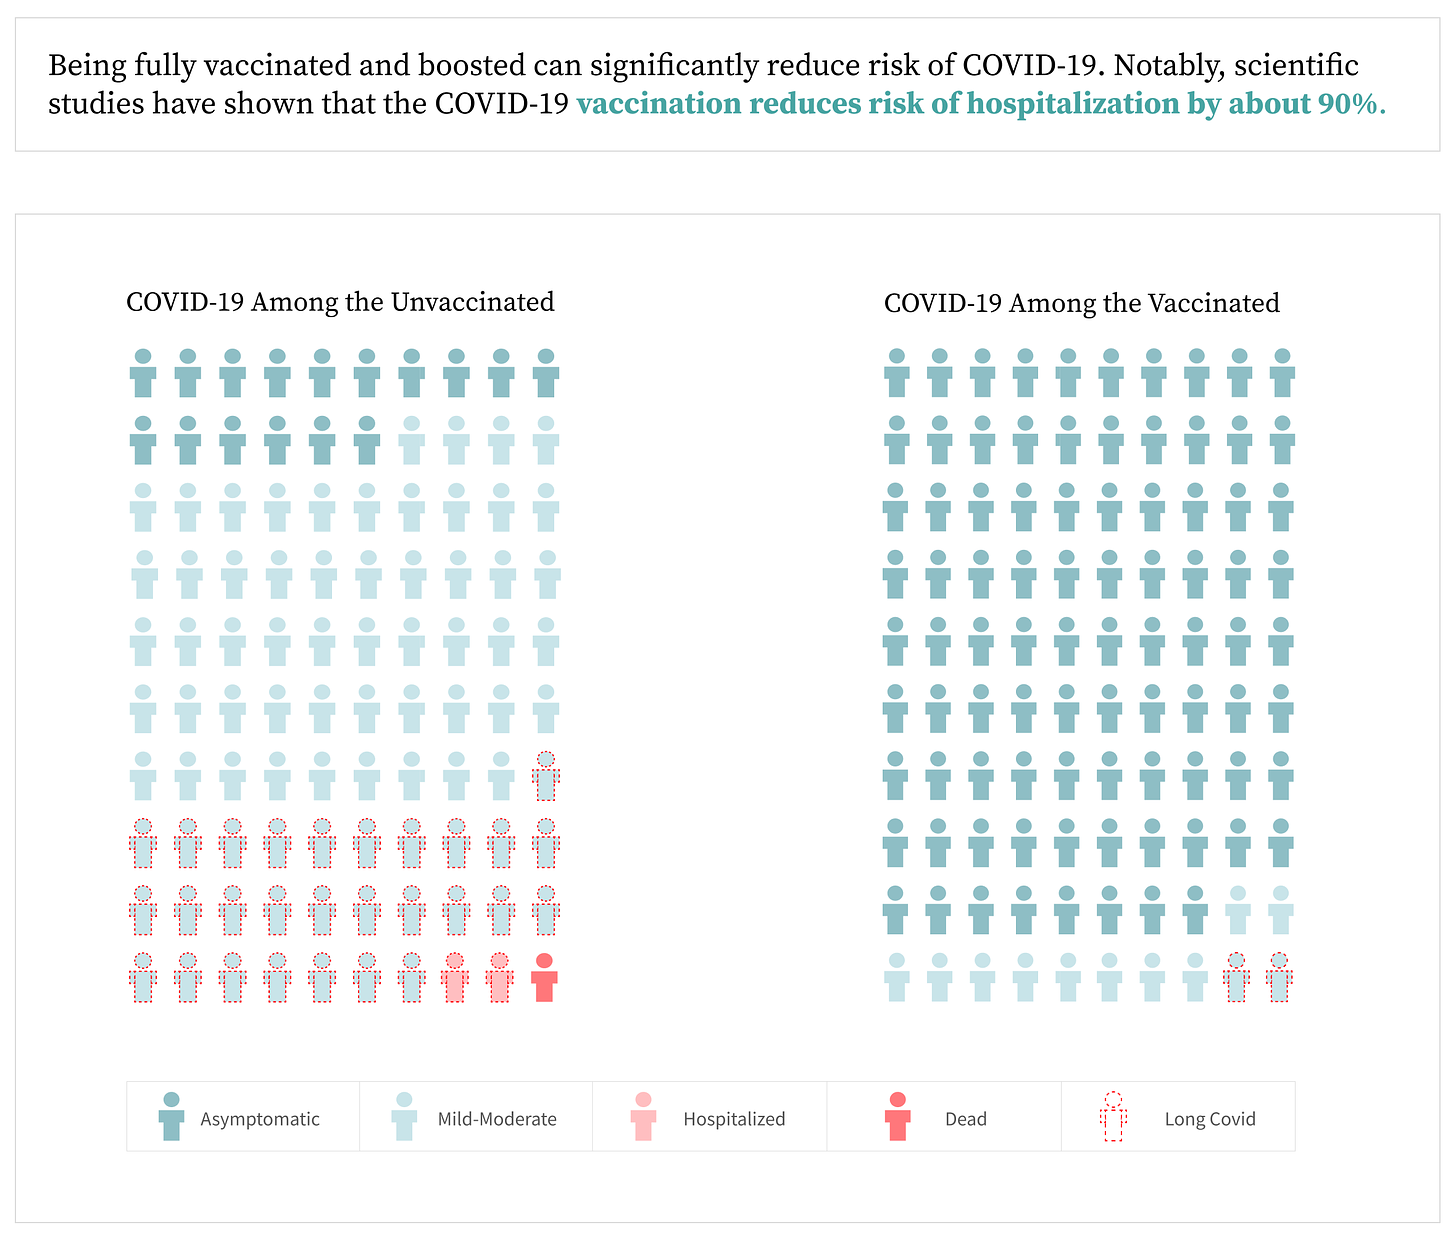 A sample information visualization that reads "Being fully vaccinated and boosted can significantly reduce risk of Covid-19. Notably, scientific studies have shown that the Covid-19 vaccine reduces risk of hospitalization by about 90%." The graphic displays Covid-19 among 100 unvaccinated people versus 100 vaccinated people. It shows the following:   Among the 100 unvaccinated people, 16 are asymptomatic, 53 have mild-moderate symptoms, 28 have mild-moderate long Covid symptoms, 2 are hospitalized, and 1 is dead.   Meanwhile, among the 100 vaccinated people, 88 are asymptomatic, 10 have mild-moderate symptoms, and 2 have mild-moderate long Covid symptoms. 0 are hospitalized or dead.